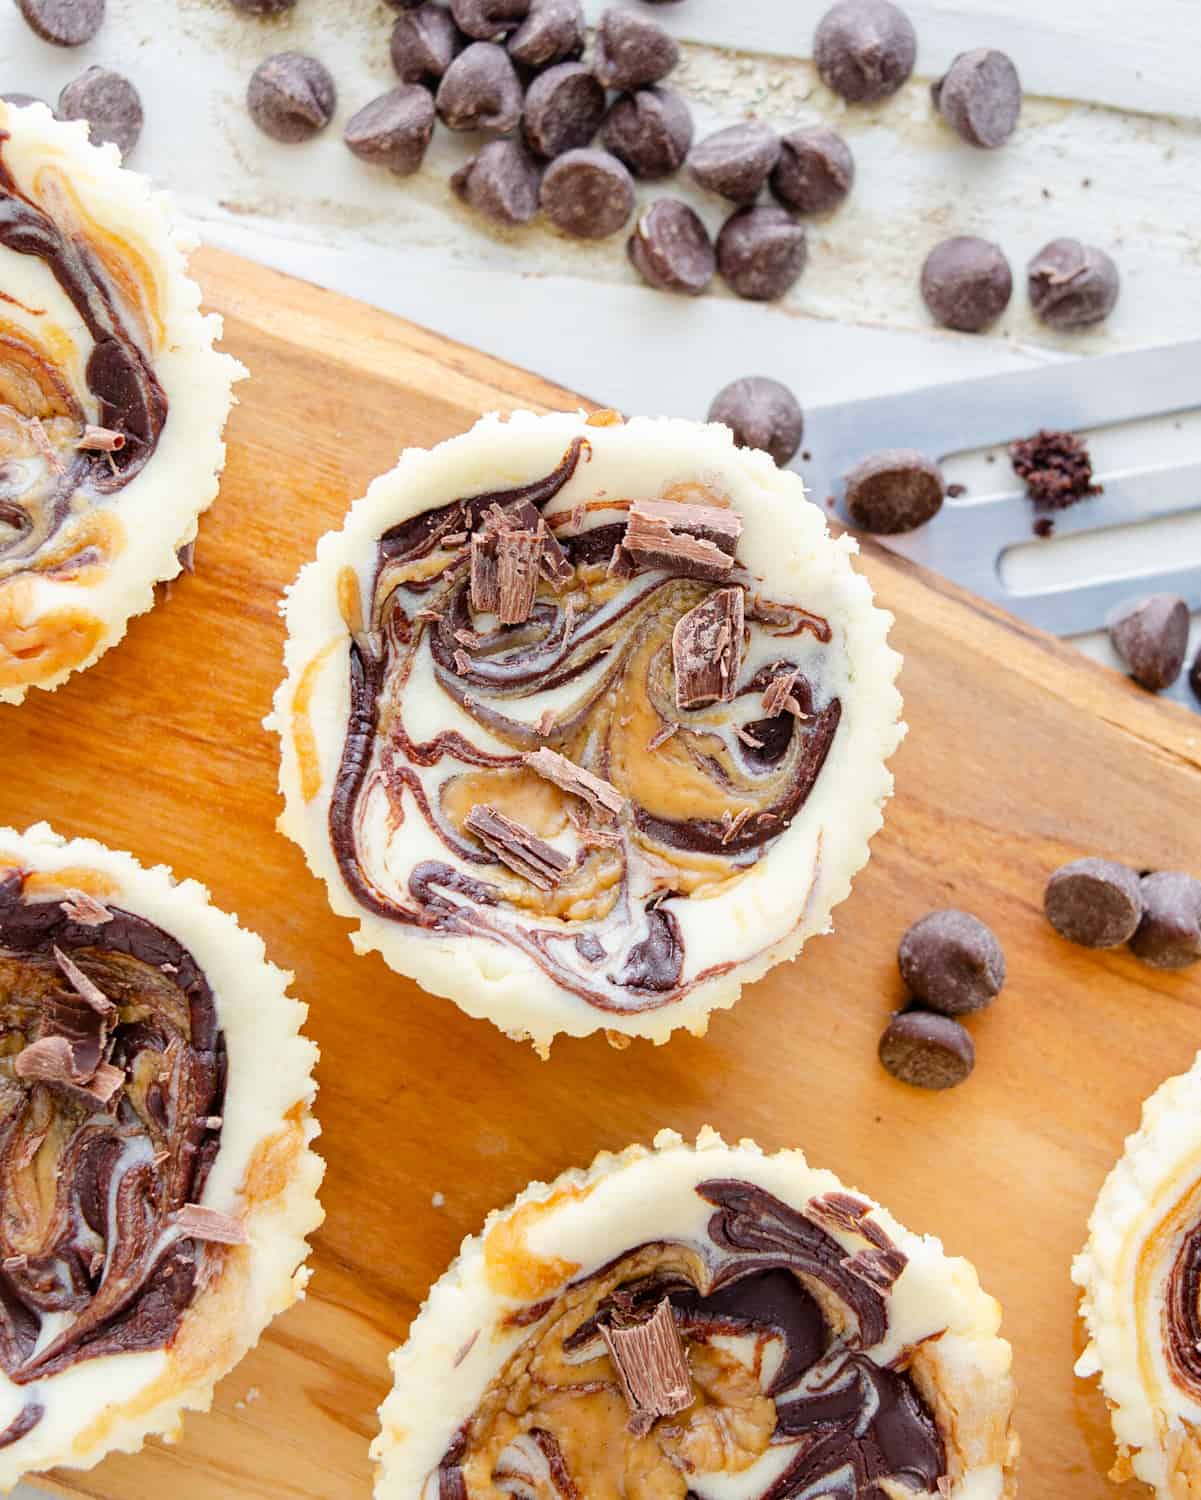 Chocolate peanut butter muffin tin keto cheesecakes on a wooden board.